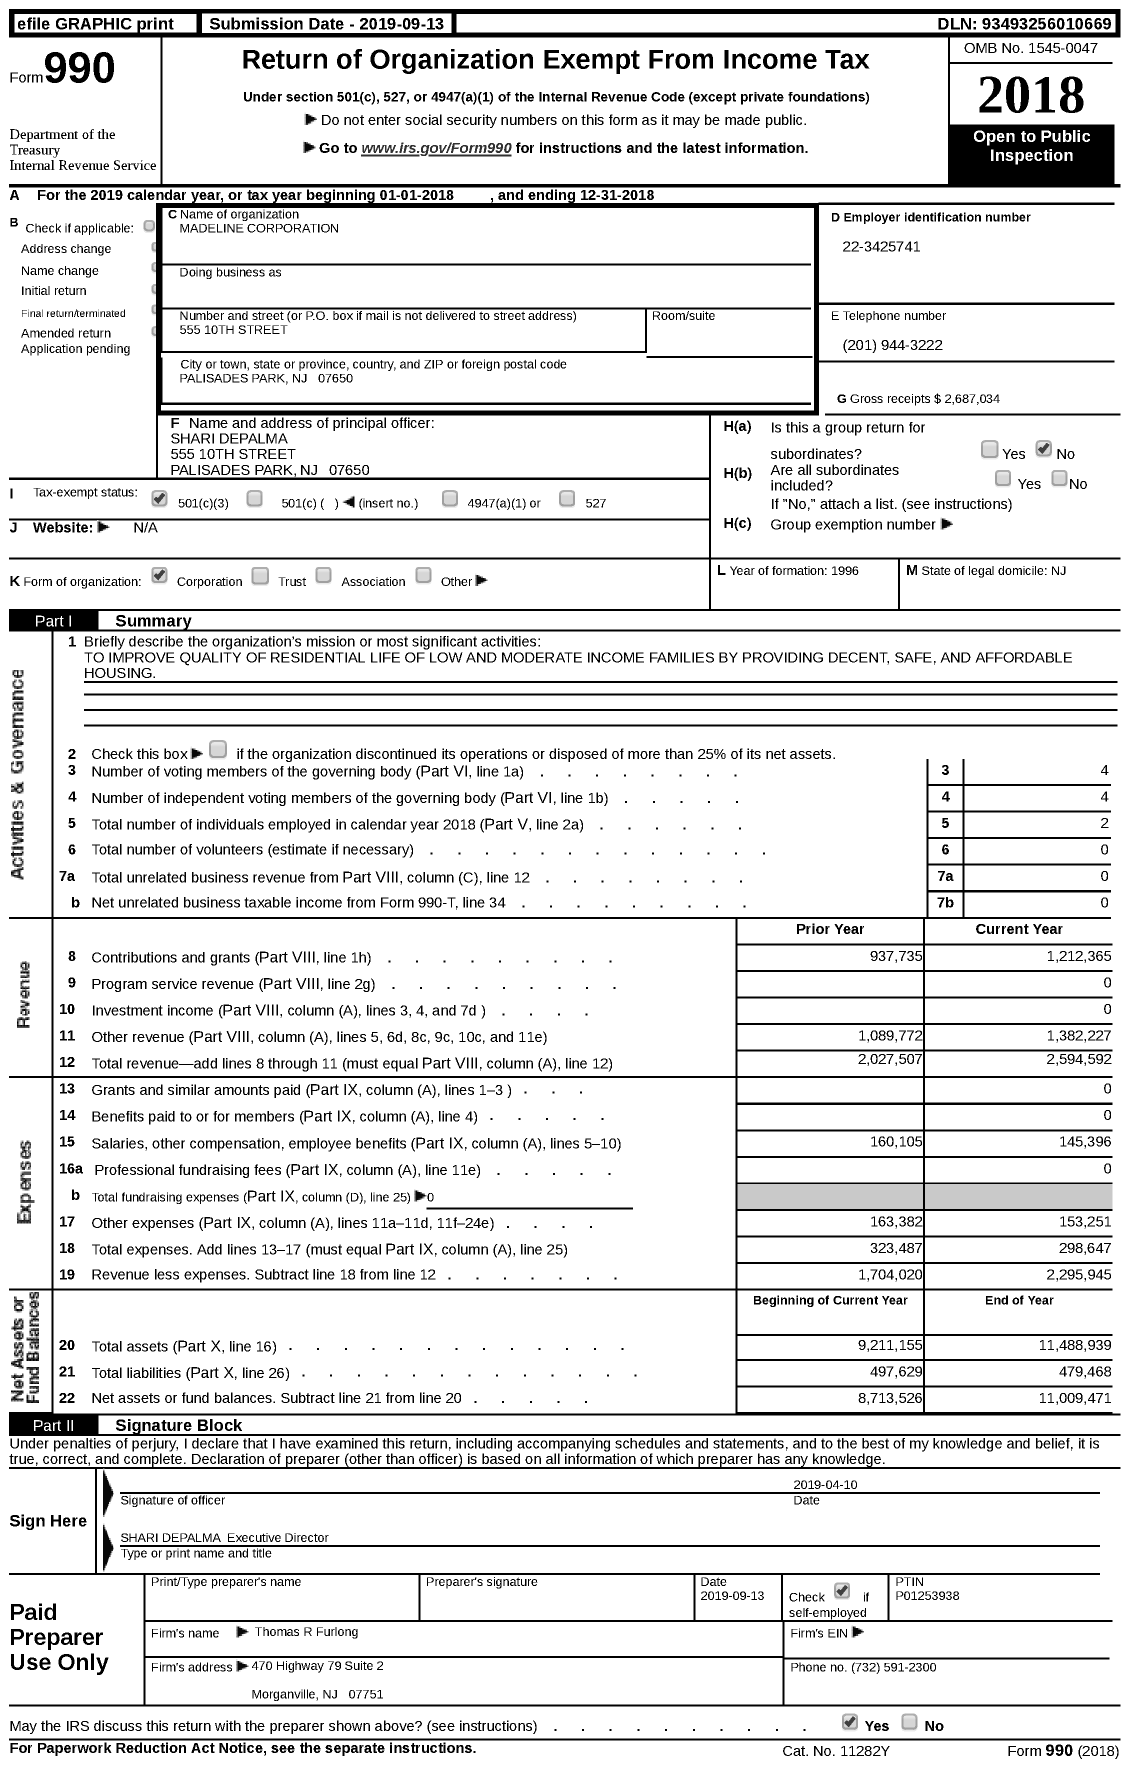 Image of first page of 2018 Form 990 for Madeline Corporation